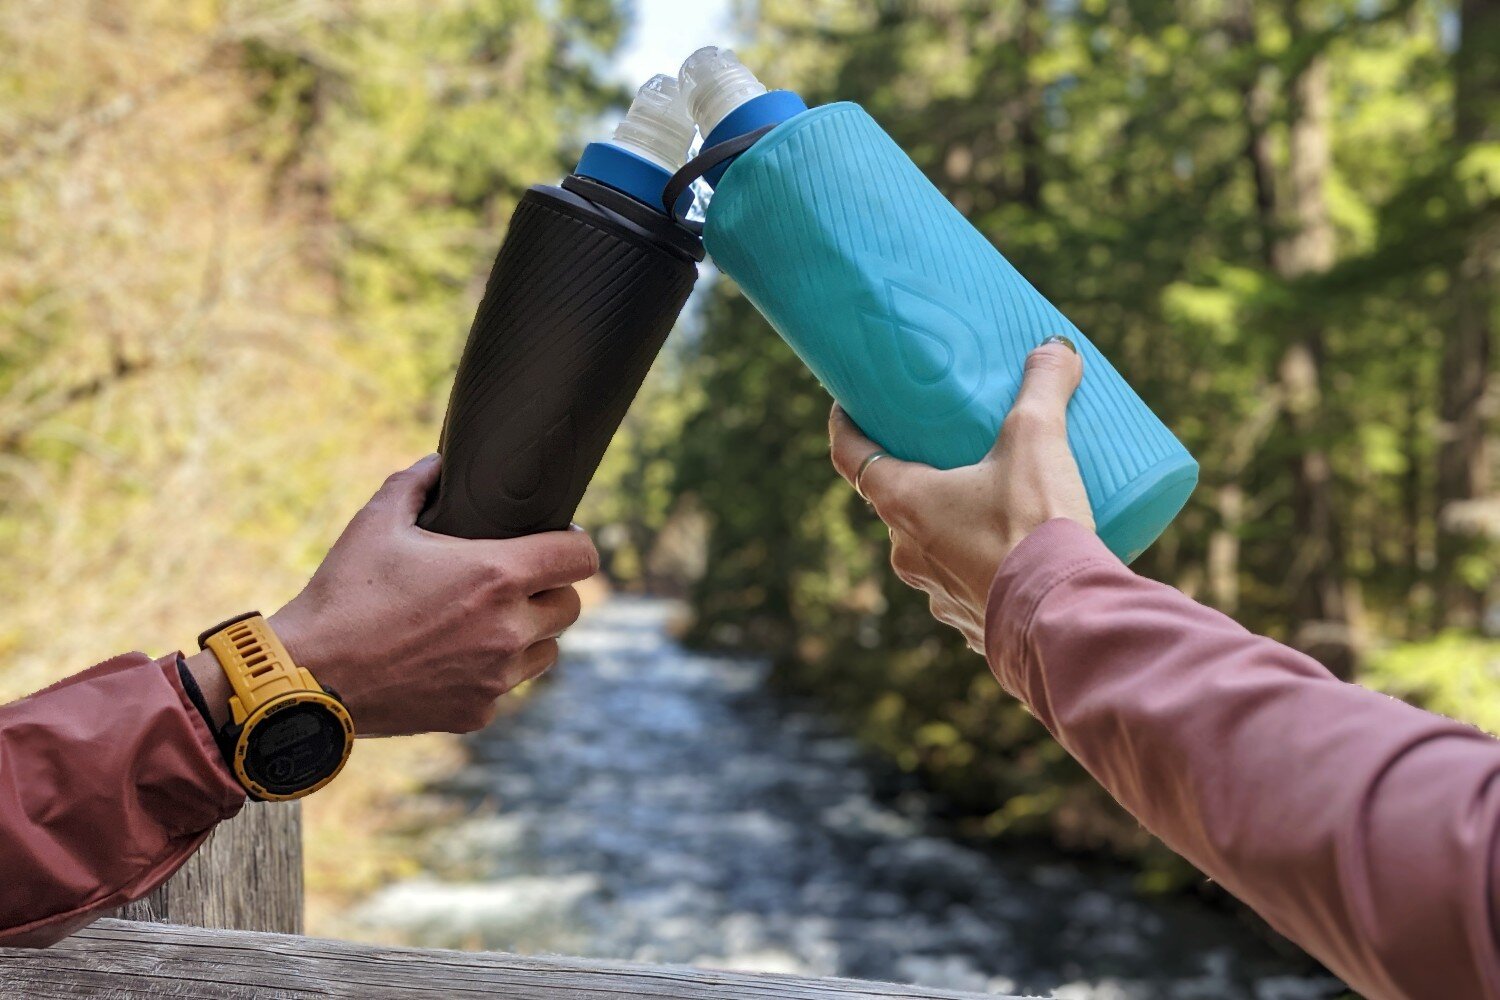 The Hydrapak Flux is super versatile which makes it a great value. We especially love it for backpacking.